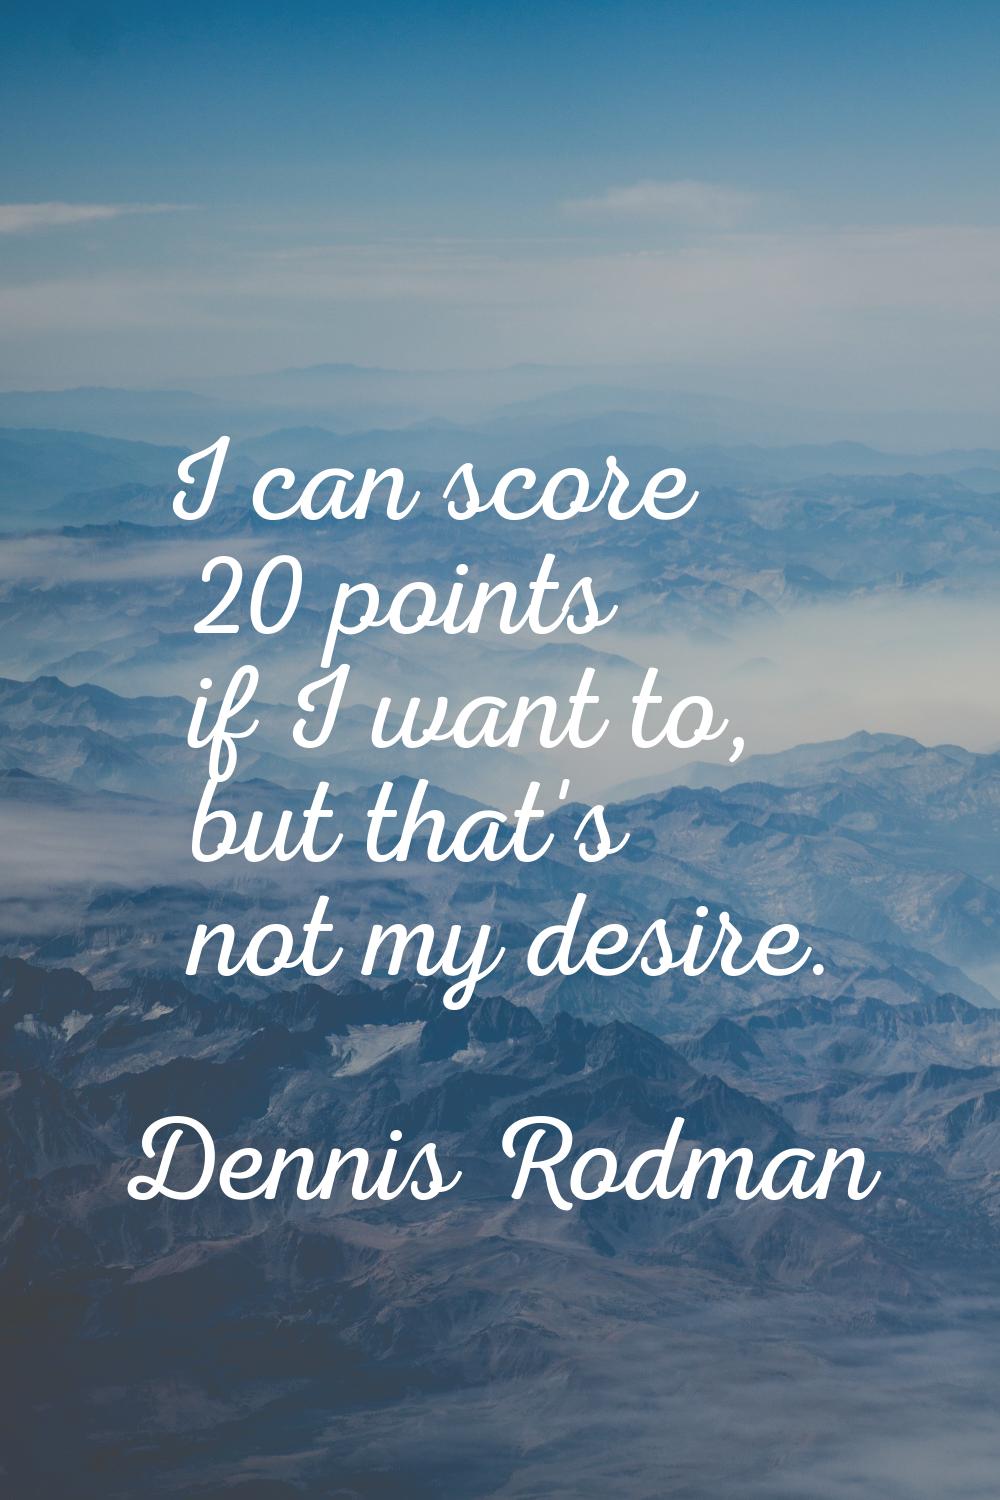 I can score 20 points if I want to, but that's not my desire.